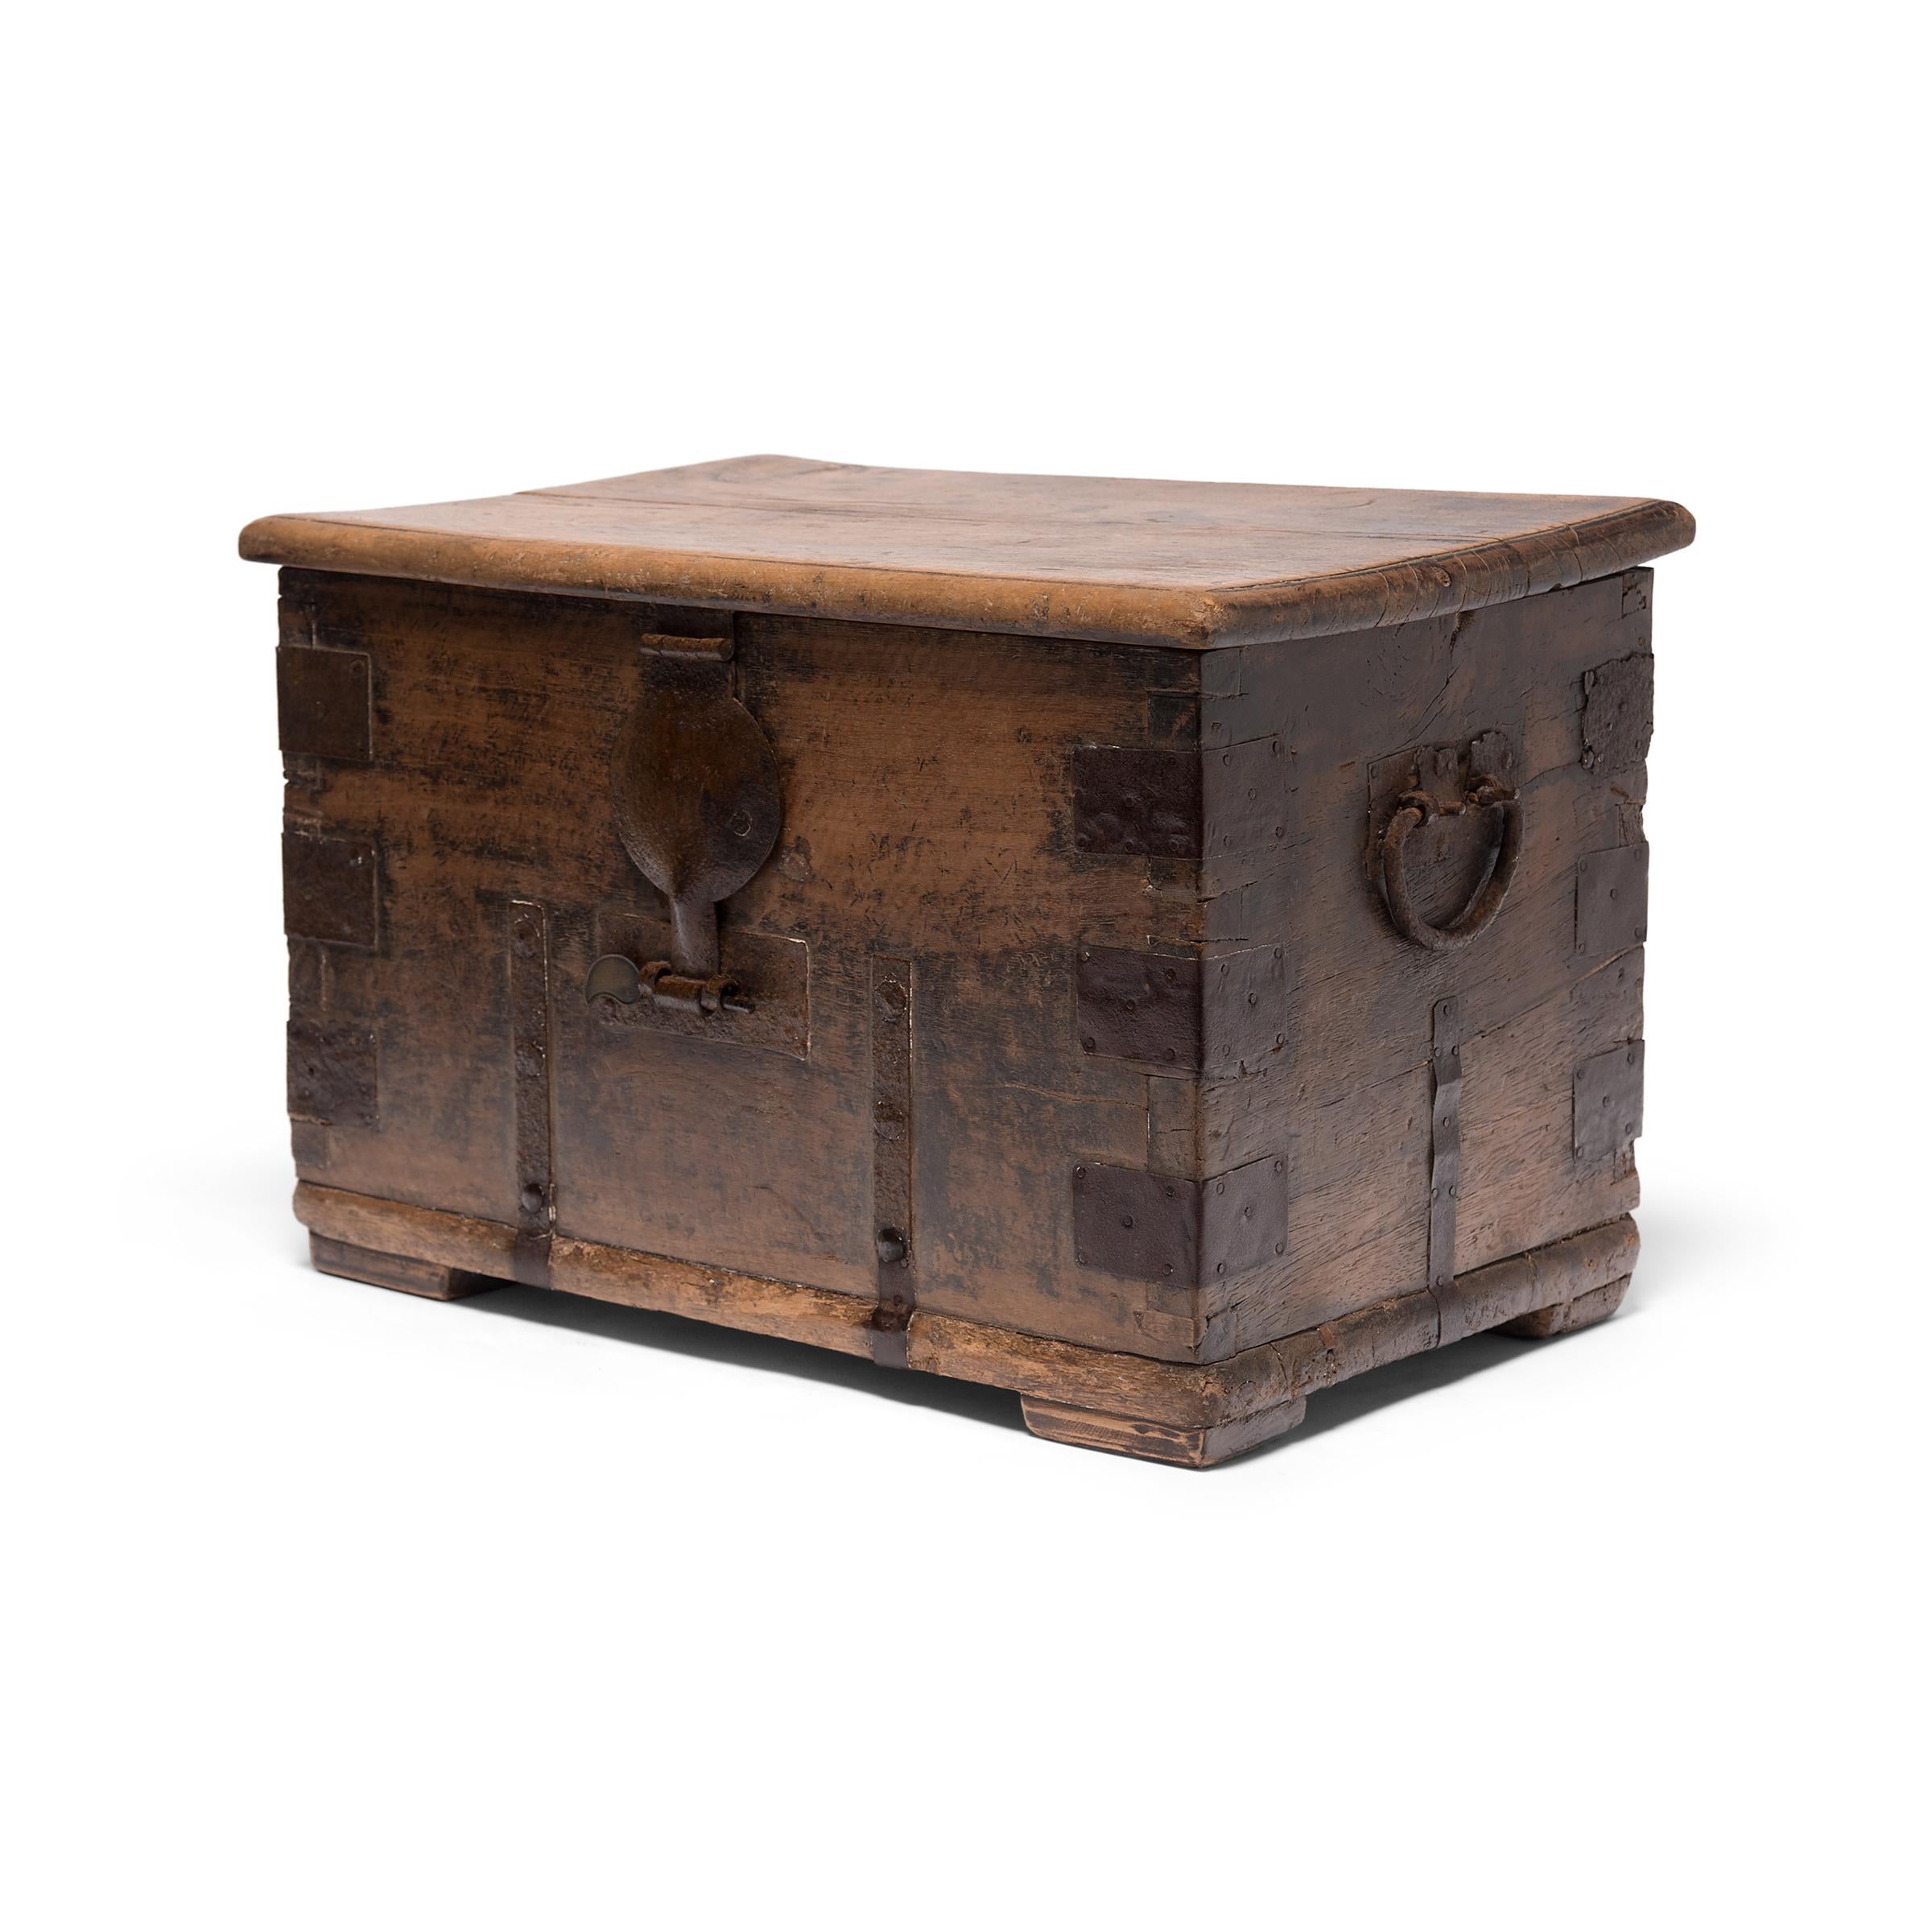 This richly aged early 19th century keeper's chest is from Shanxi province, China and would have been used to safely store one's valuables. The original hand forged iron hardware was designed exclusively for function, but we love the way it